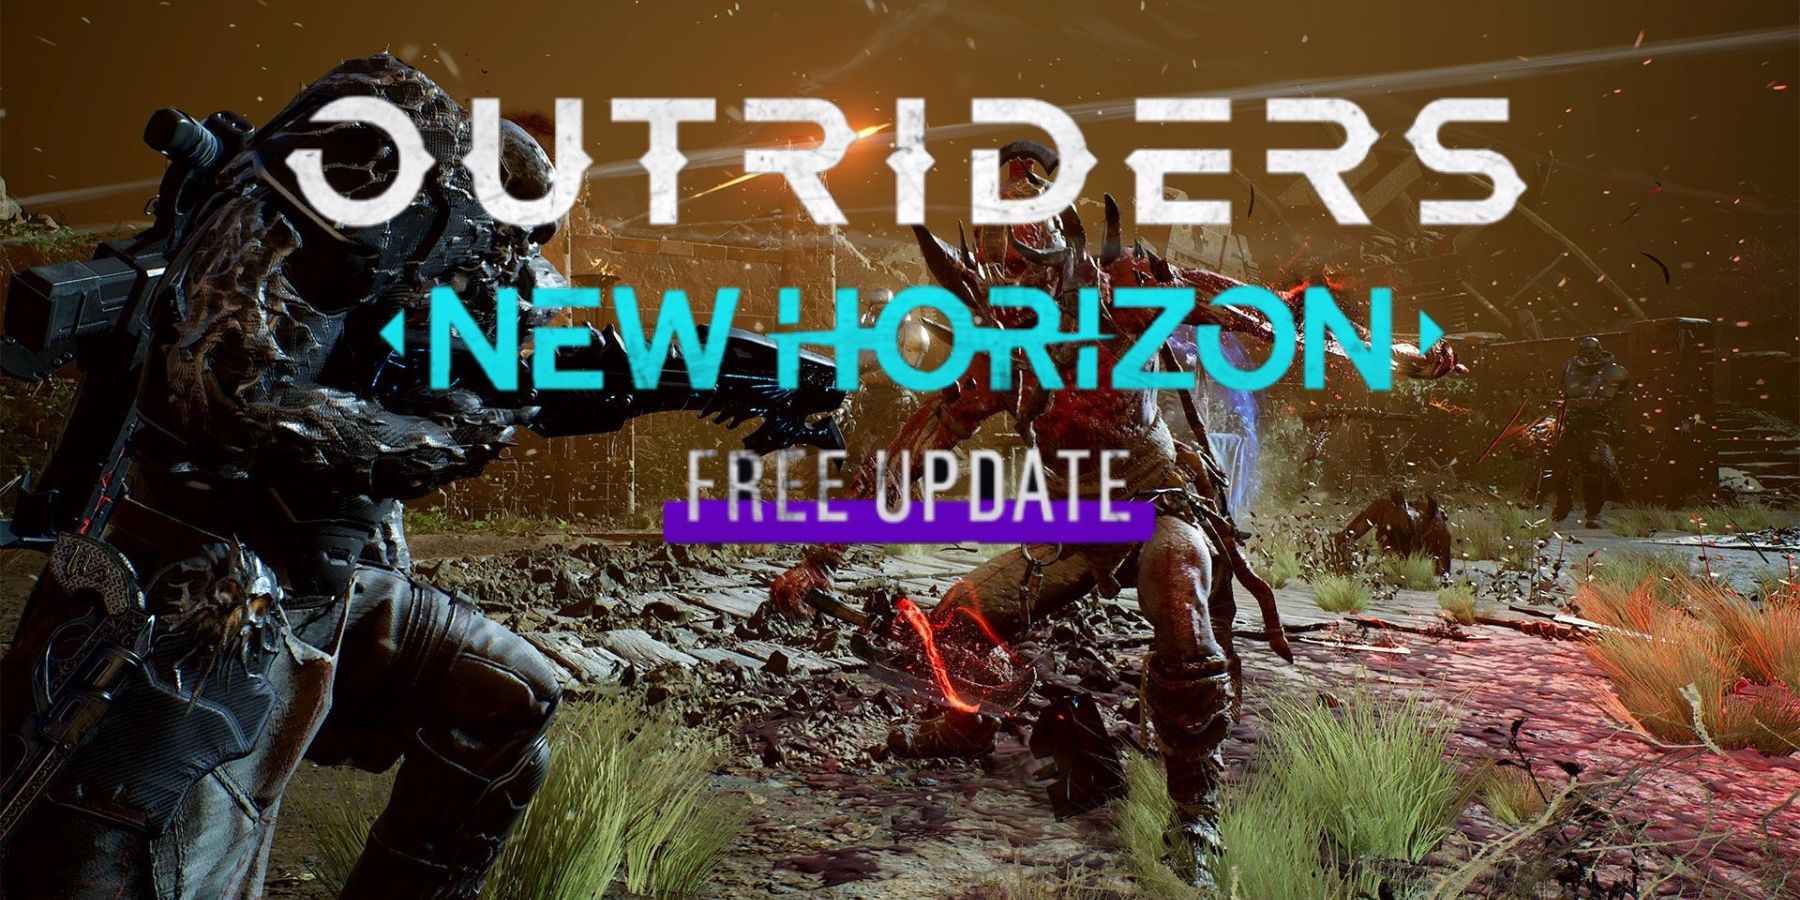 outriders new horizon free update release time guide consoles pc crossplay transmog expeditions timer endgame worldslayer